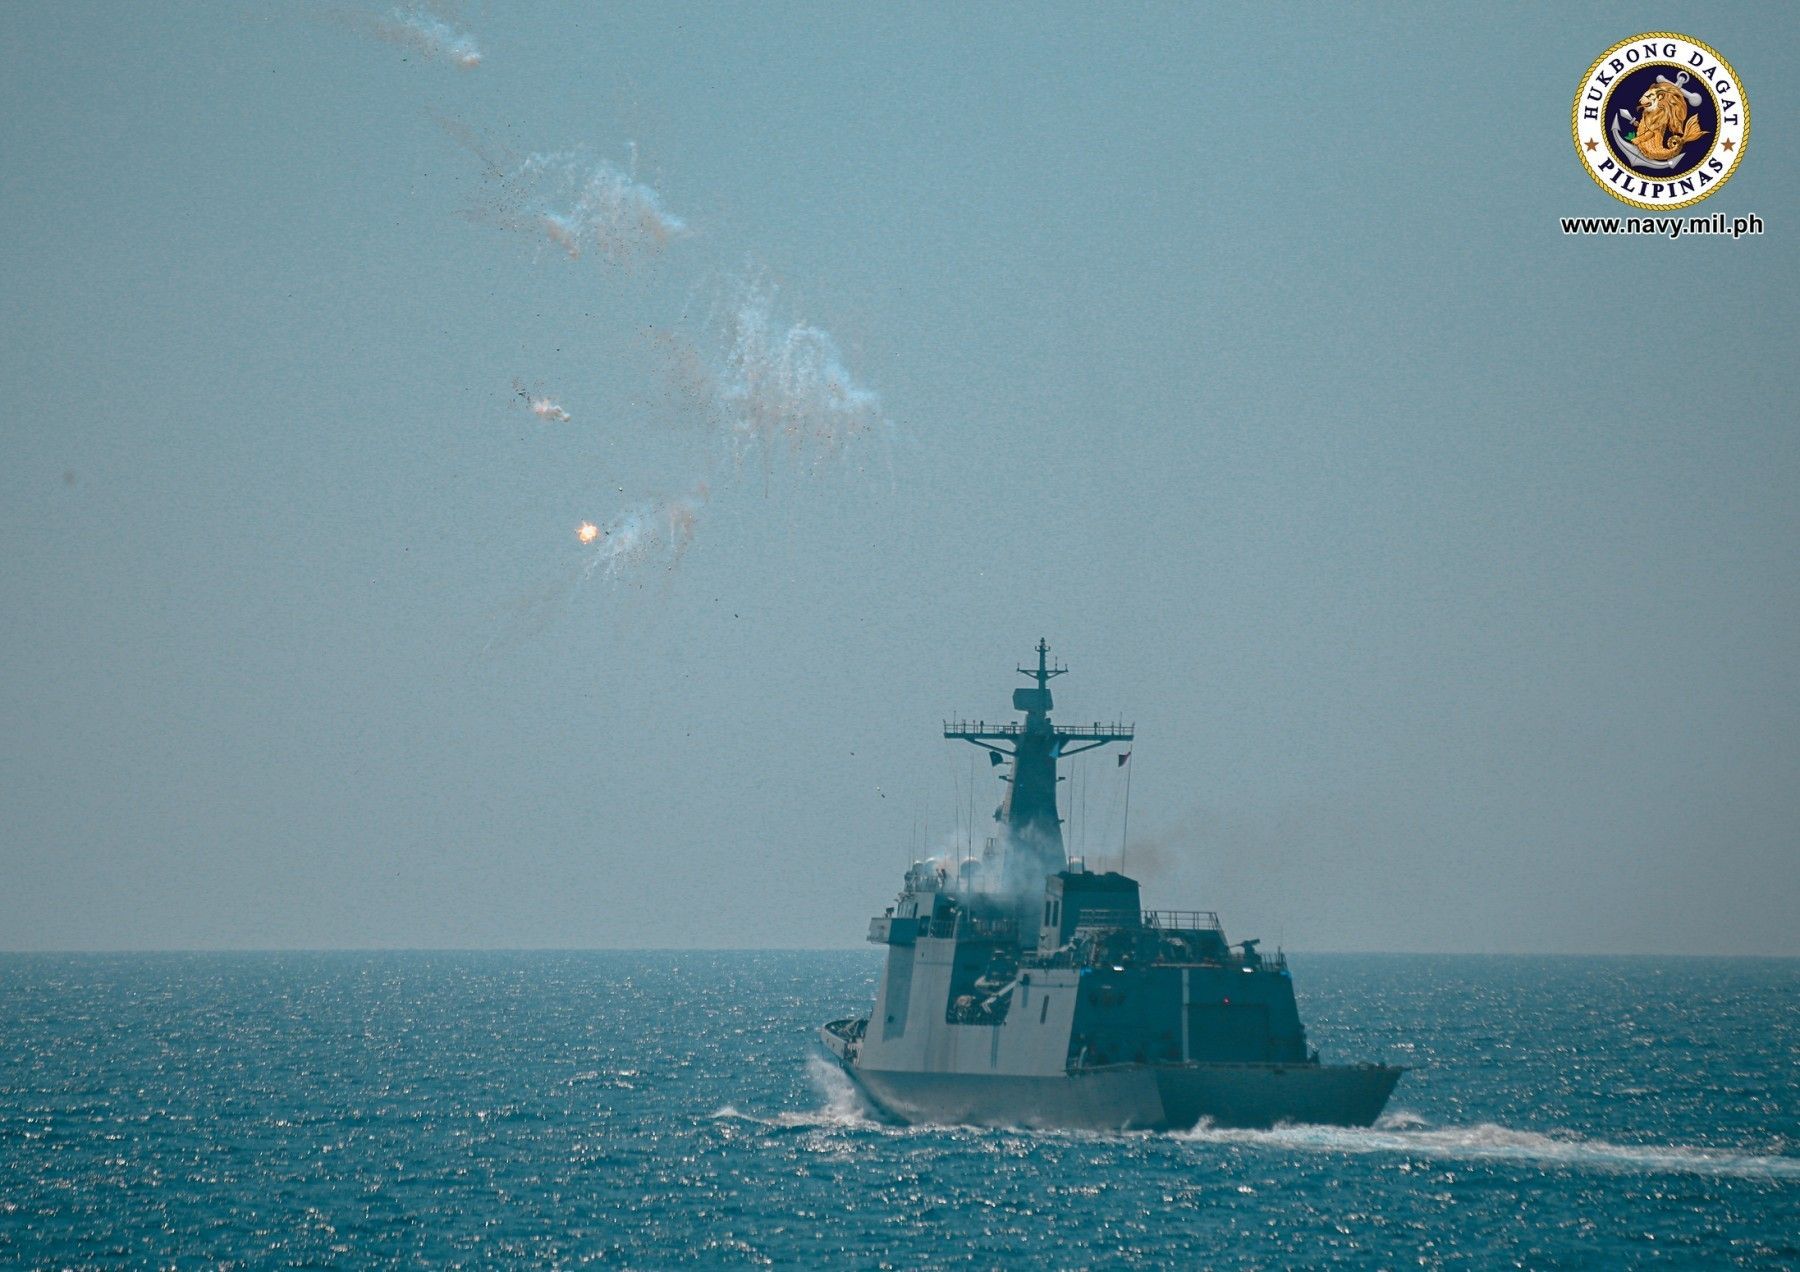 Navy frigates test new countermeasures against anti-ship missiles